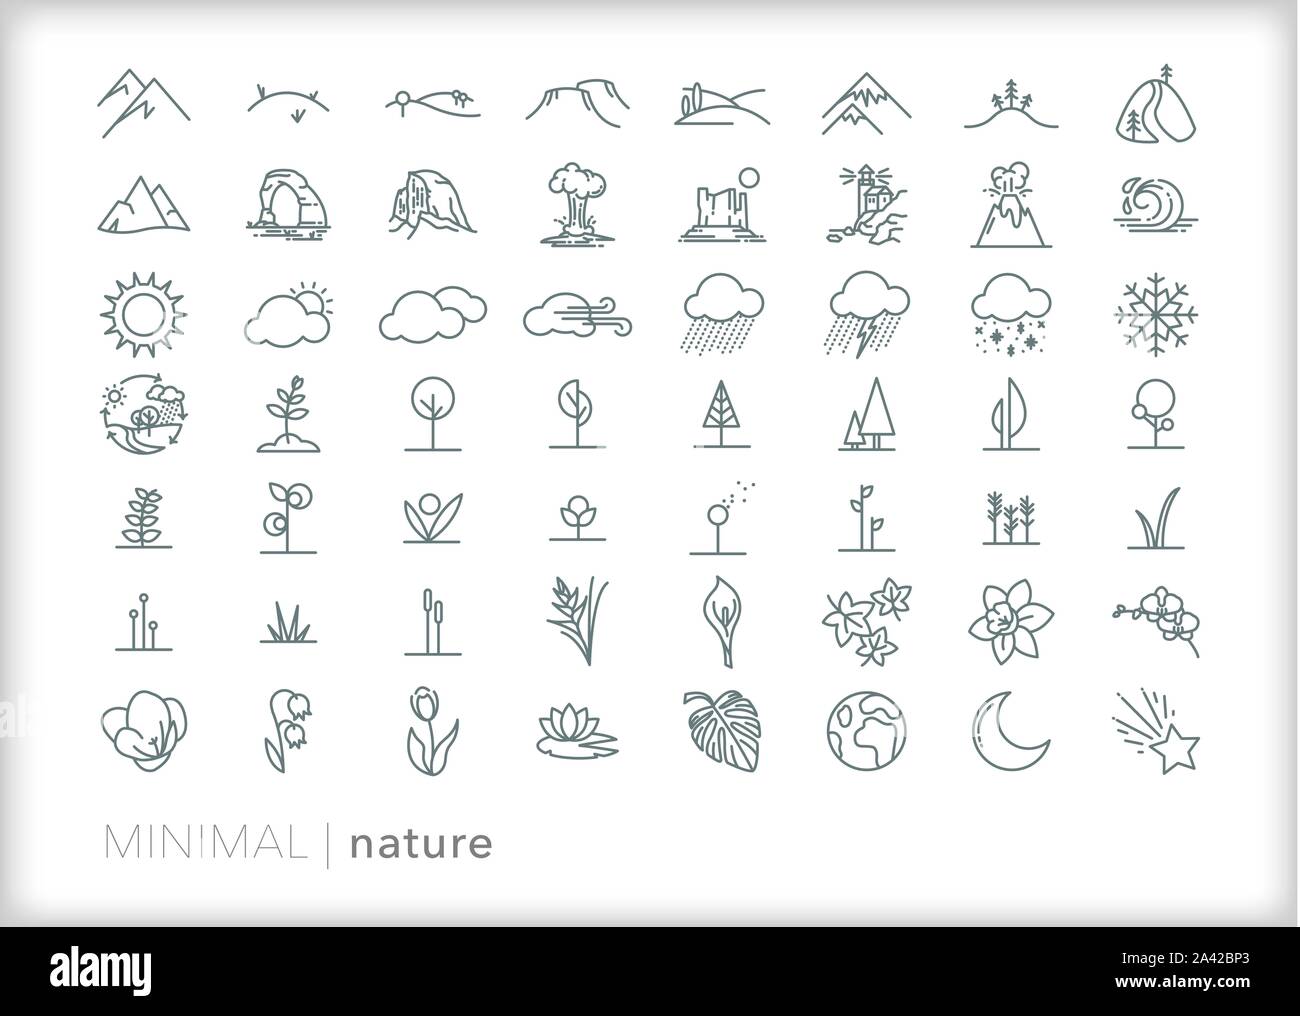 Set of 50+ nature line icons of plants, trees, flowers, weather, landscapes, mountains and National Park sites Stock Vector